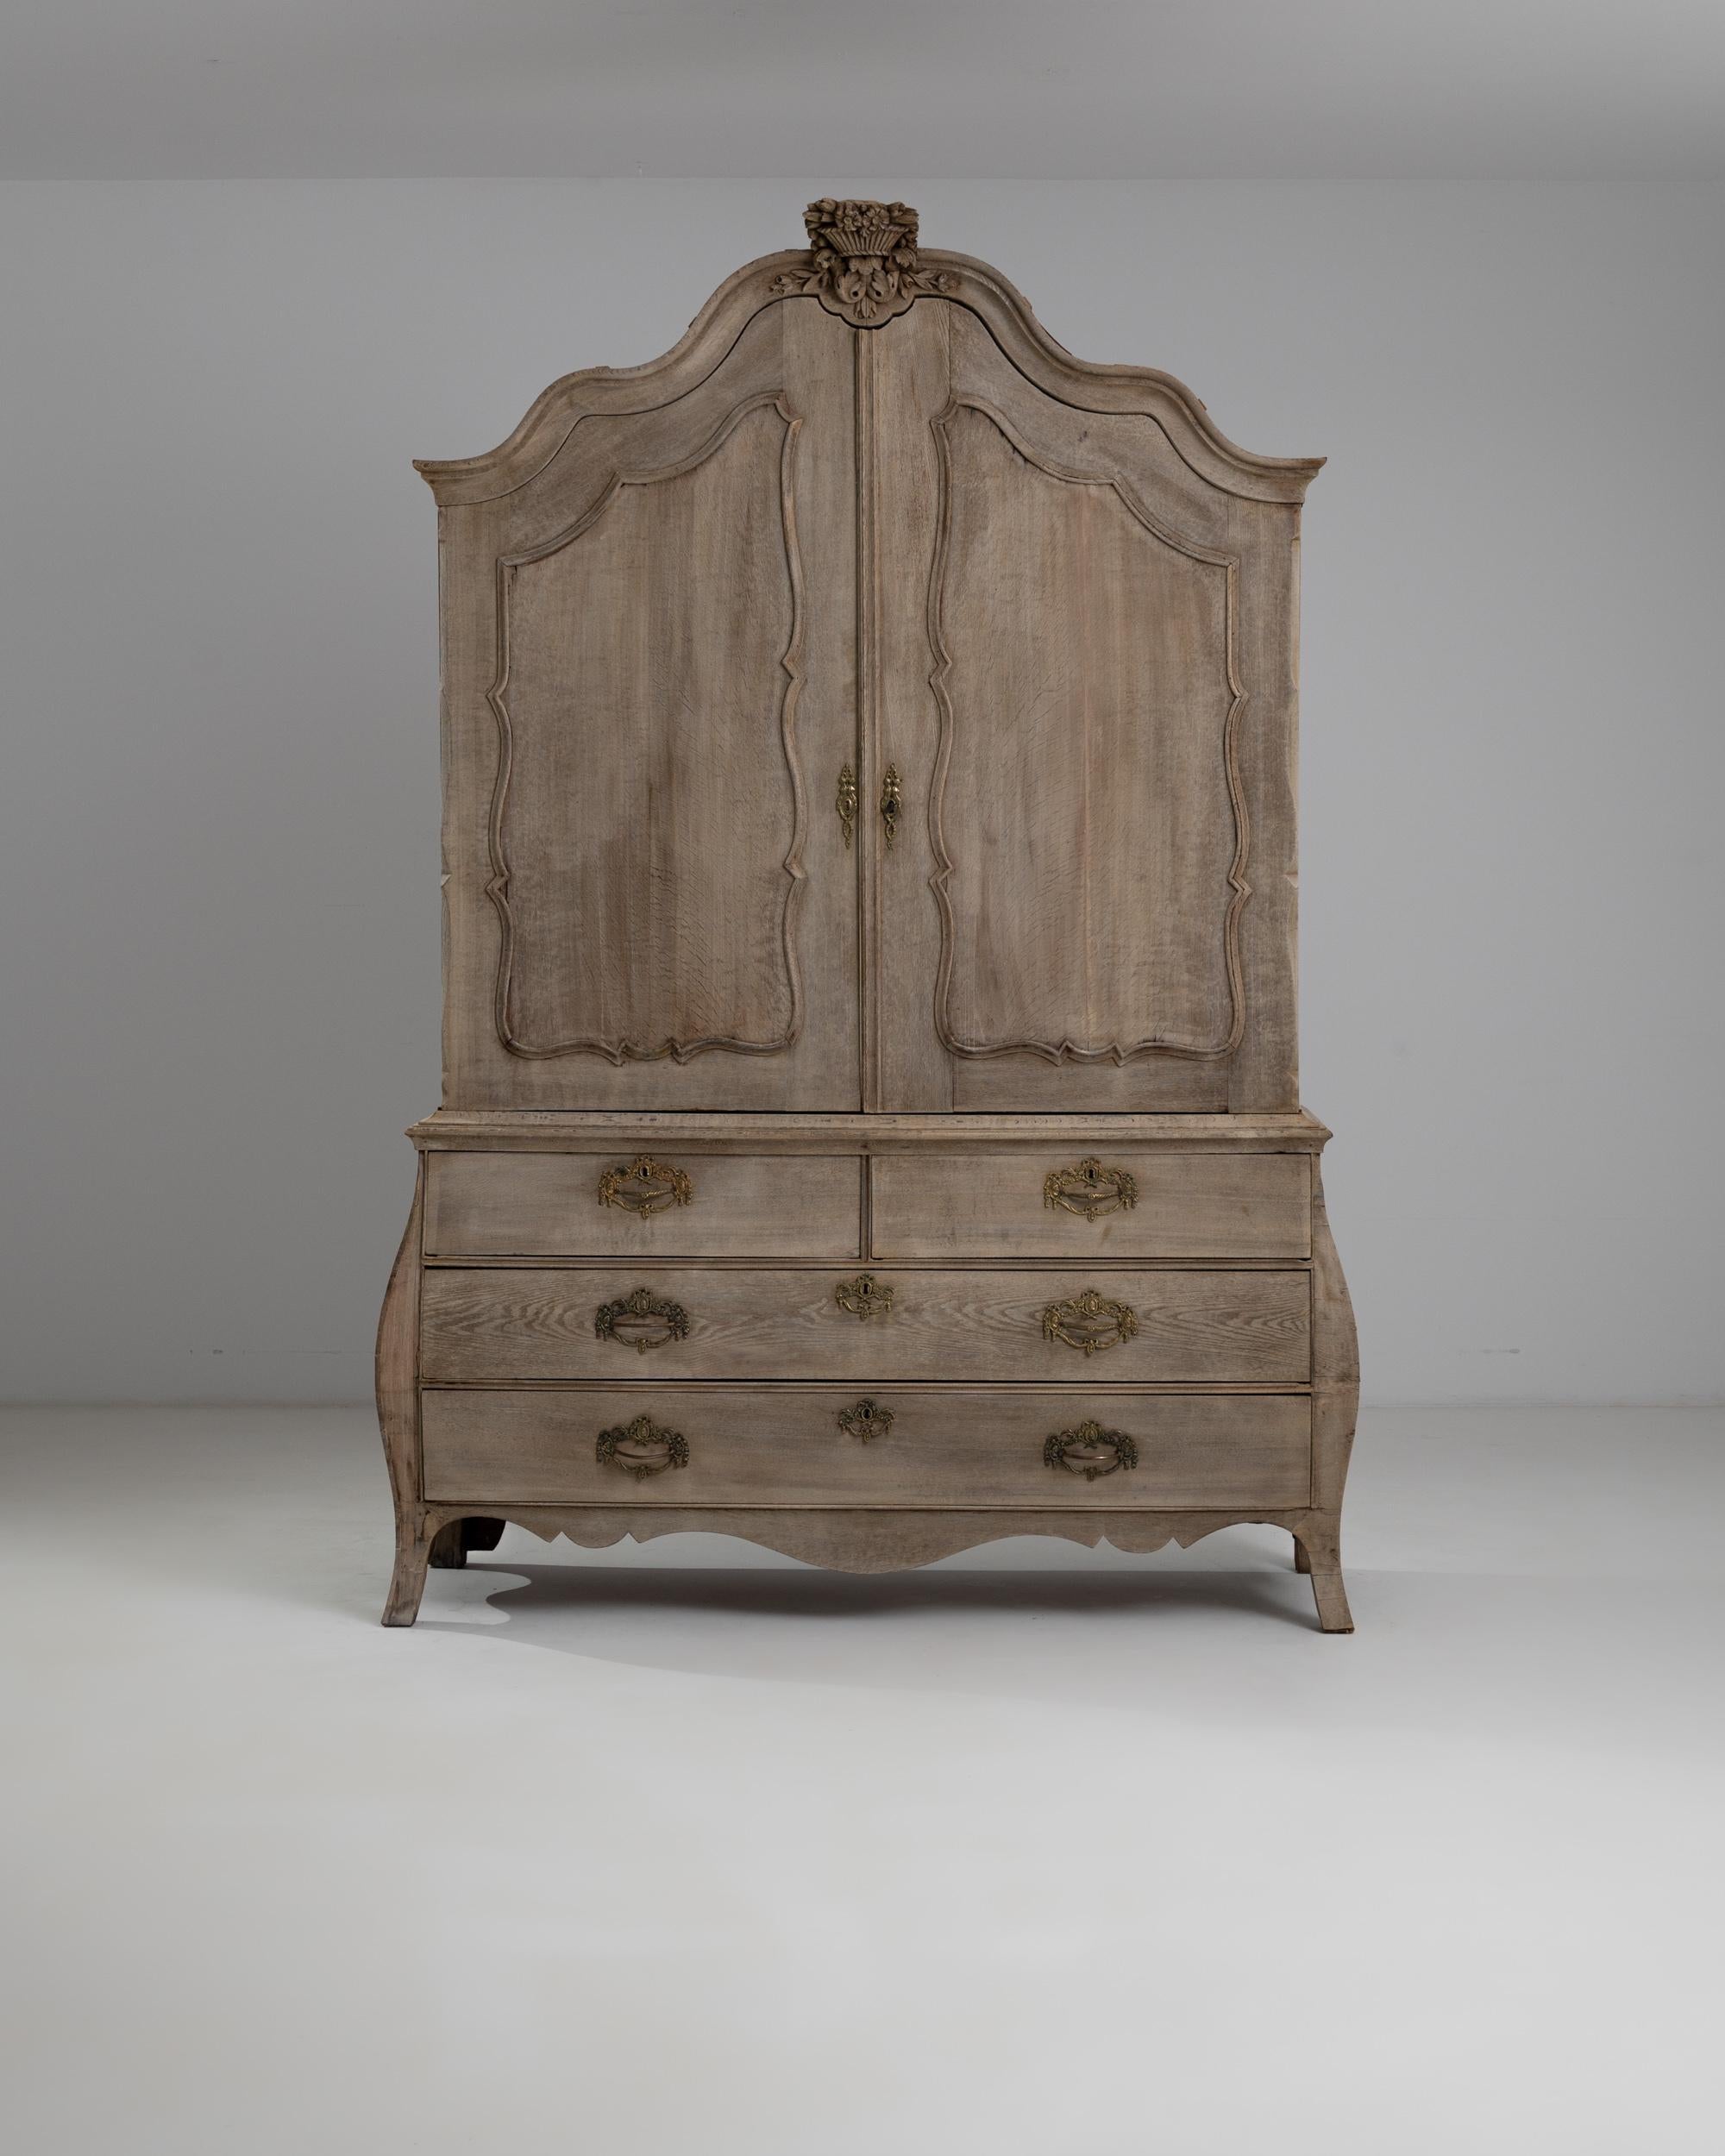 An antique cabinet produced in the Netherlands, circa 1800. This stately chest rests on curving legs, giving its linear form a subtle curve. The curve is echoed in the outline of the panel doors, and crowned by an ornate molding and an ornamental